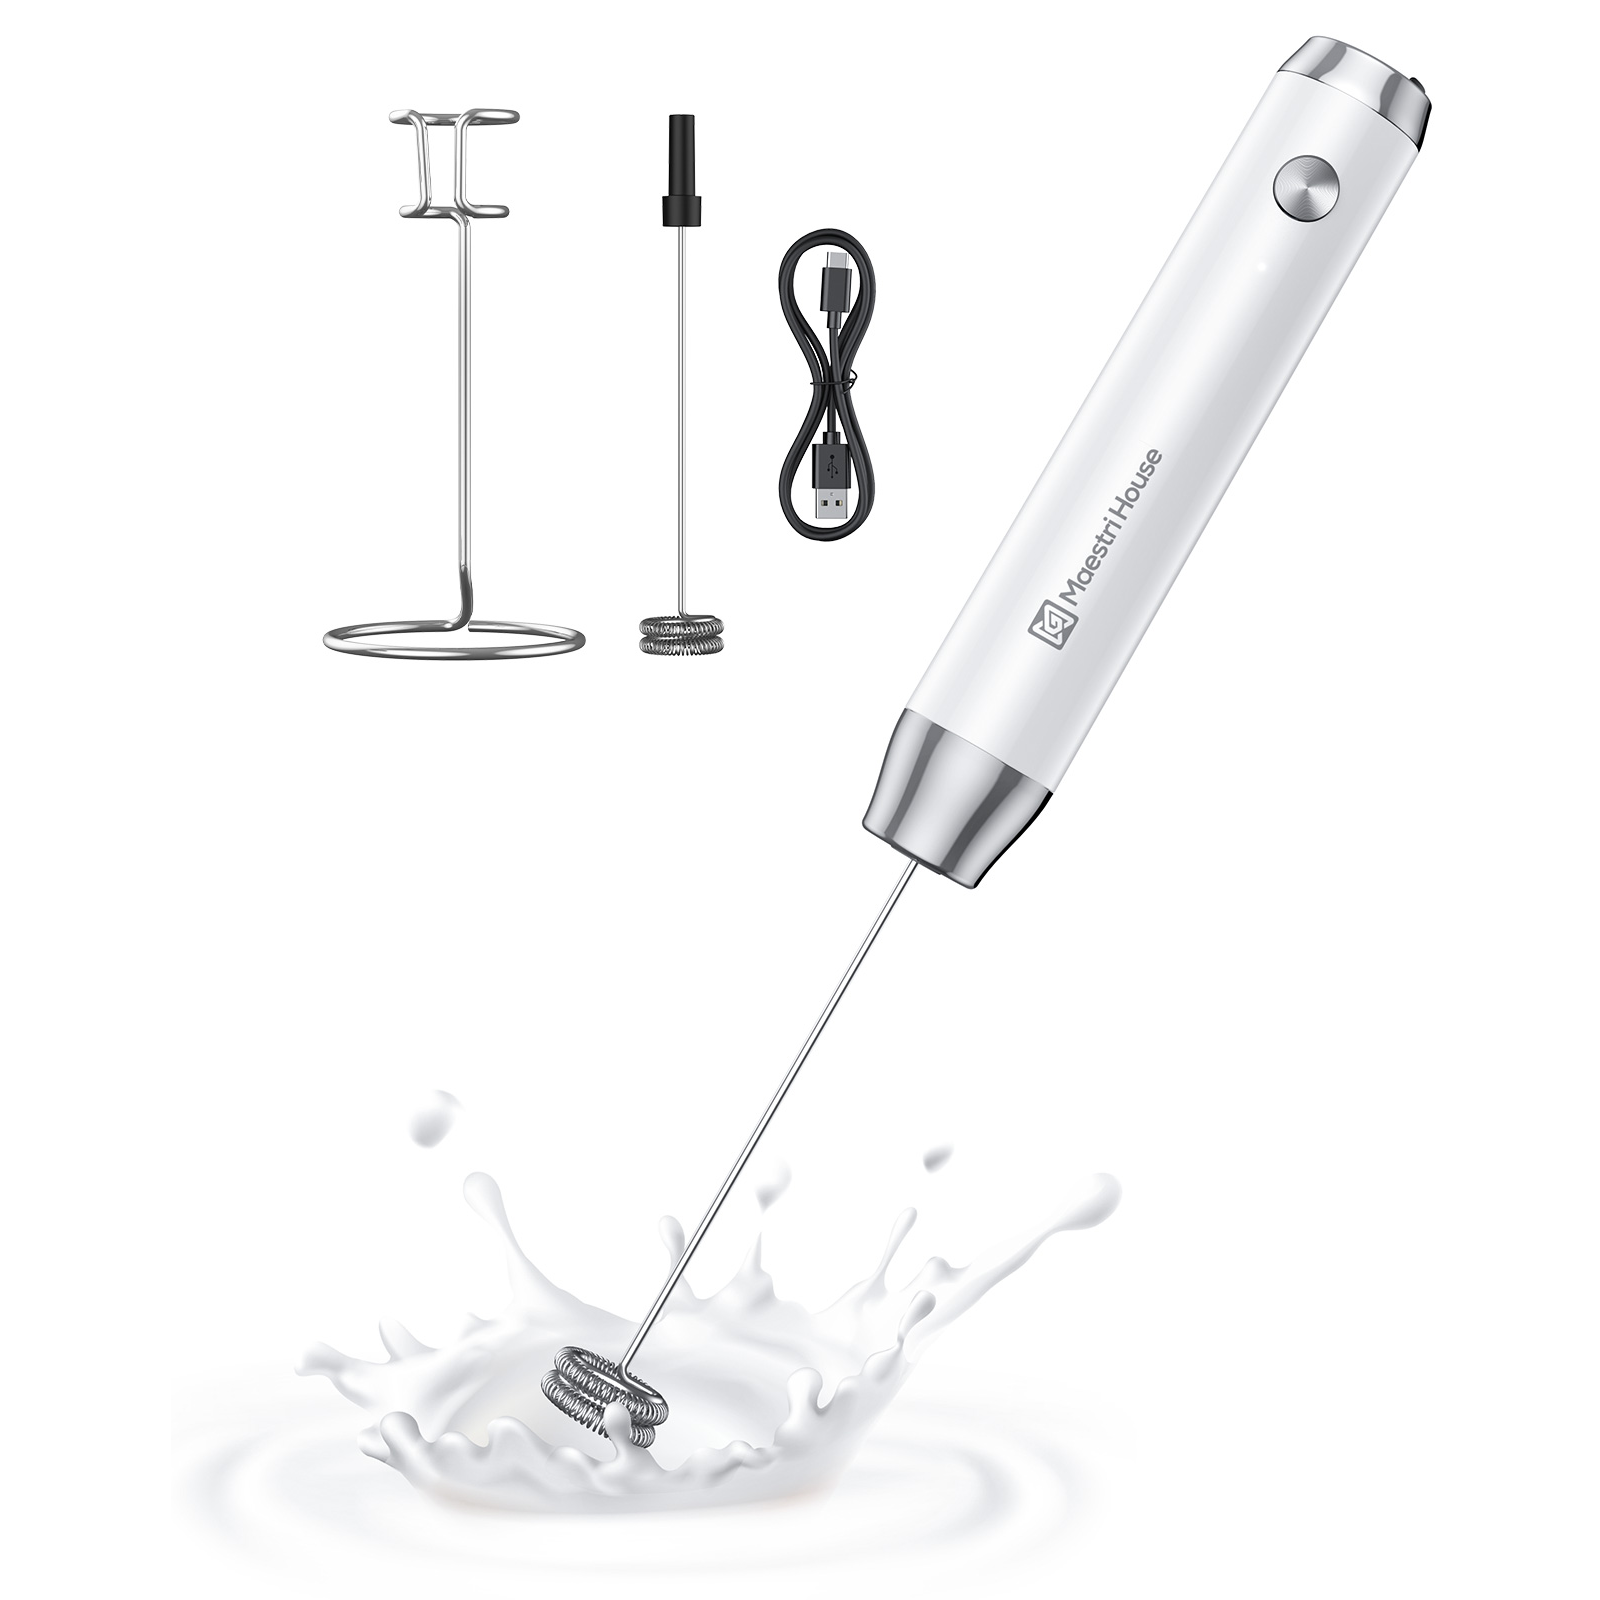 Handheld Milk Frother, ROMAUNT Battery Operated Electric HandHeld